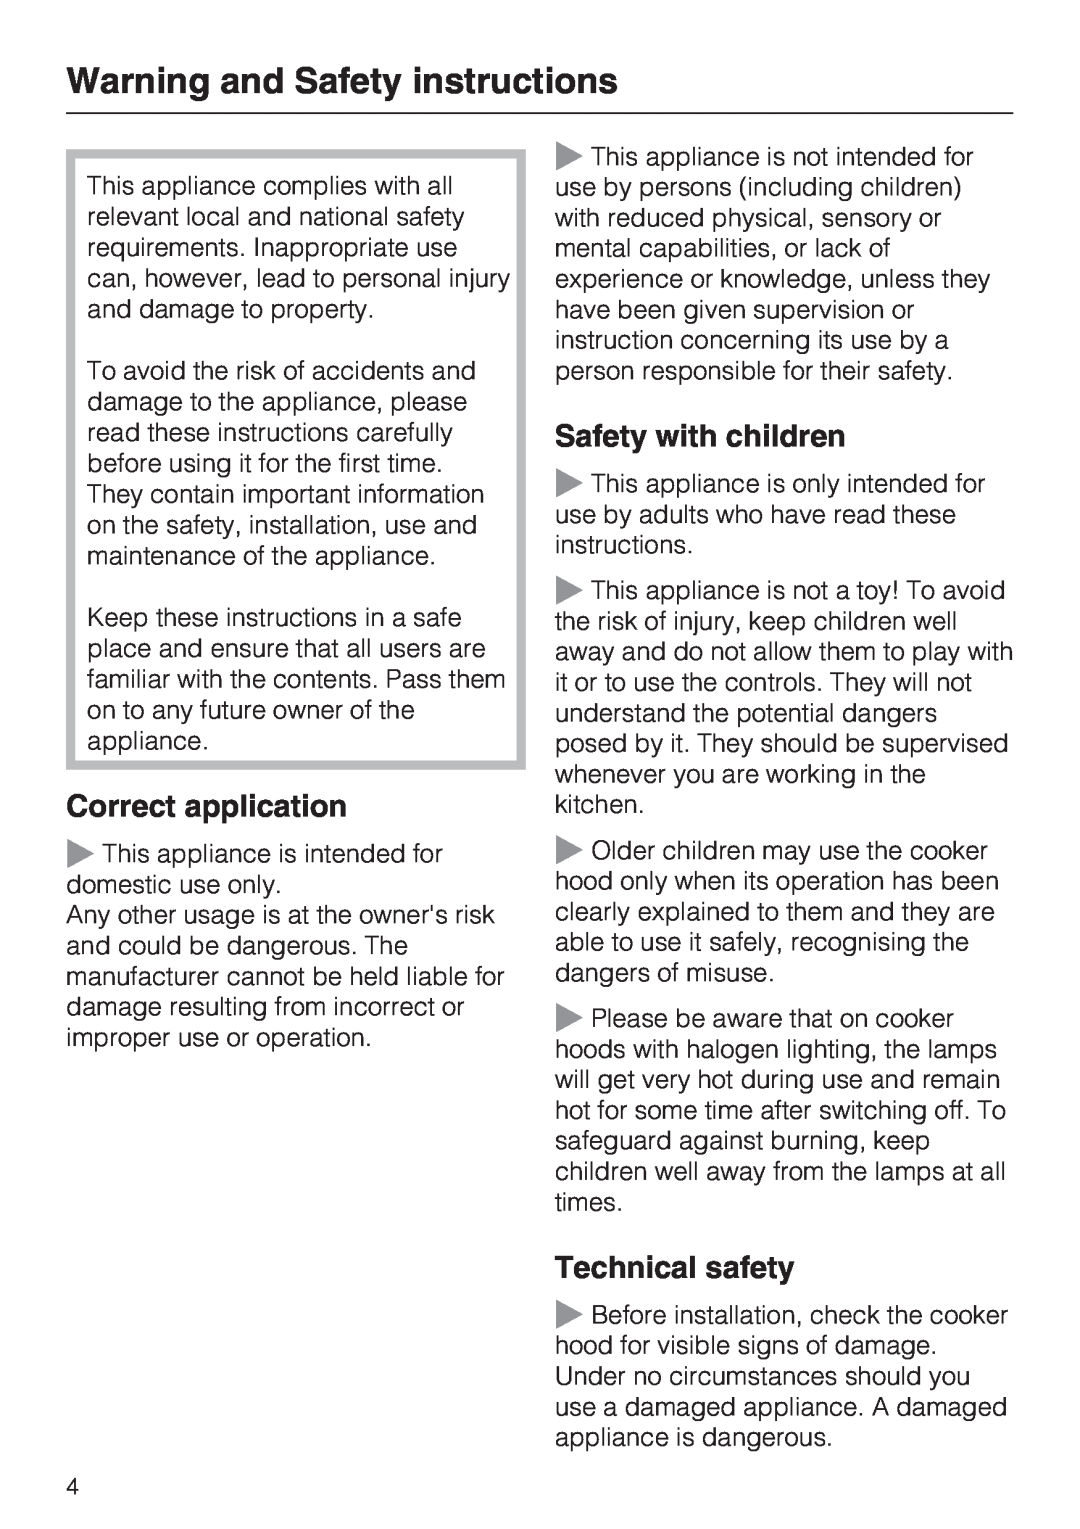 Miele DA 3190 EXT Warning and Safety instructions, Correct application, Safety with children, Technical safety 